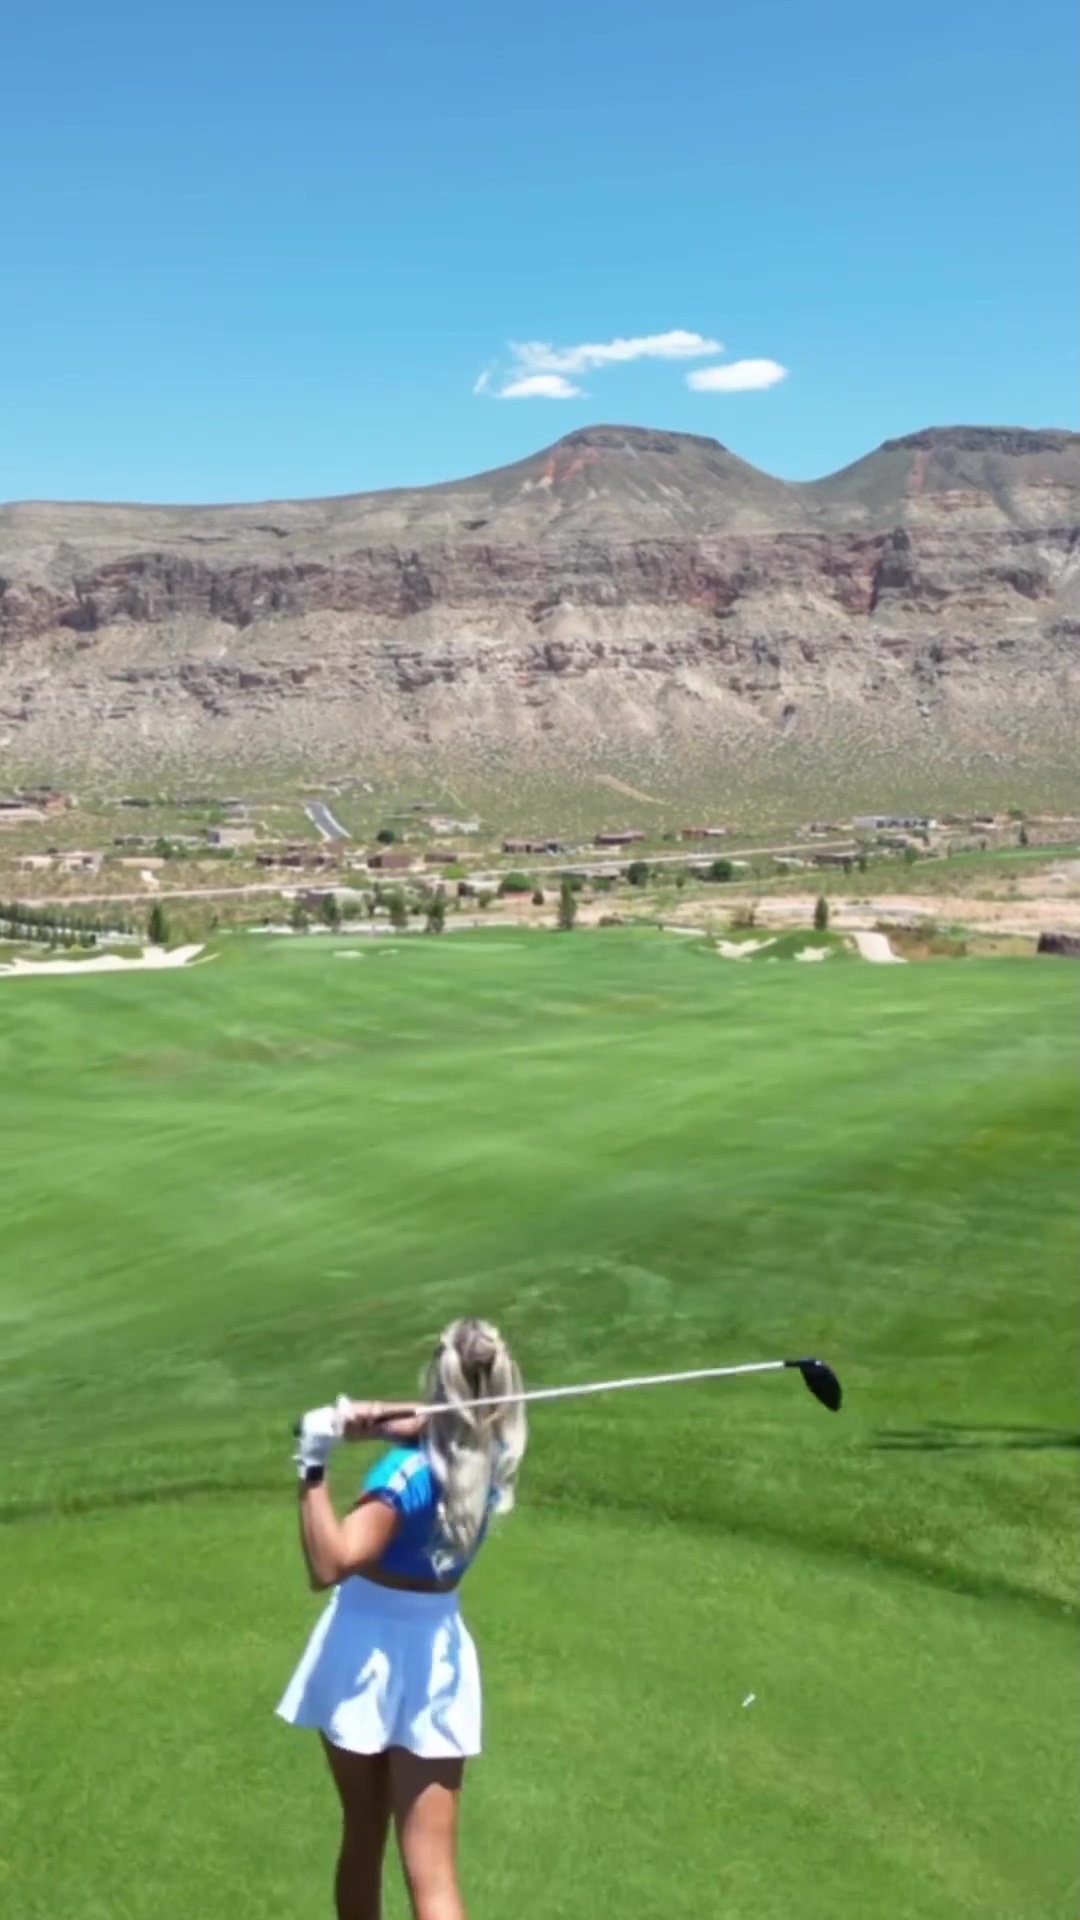 The drone followed the path of the ball and revealed jaw-dropping videos of the overview of the golf course